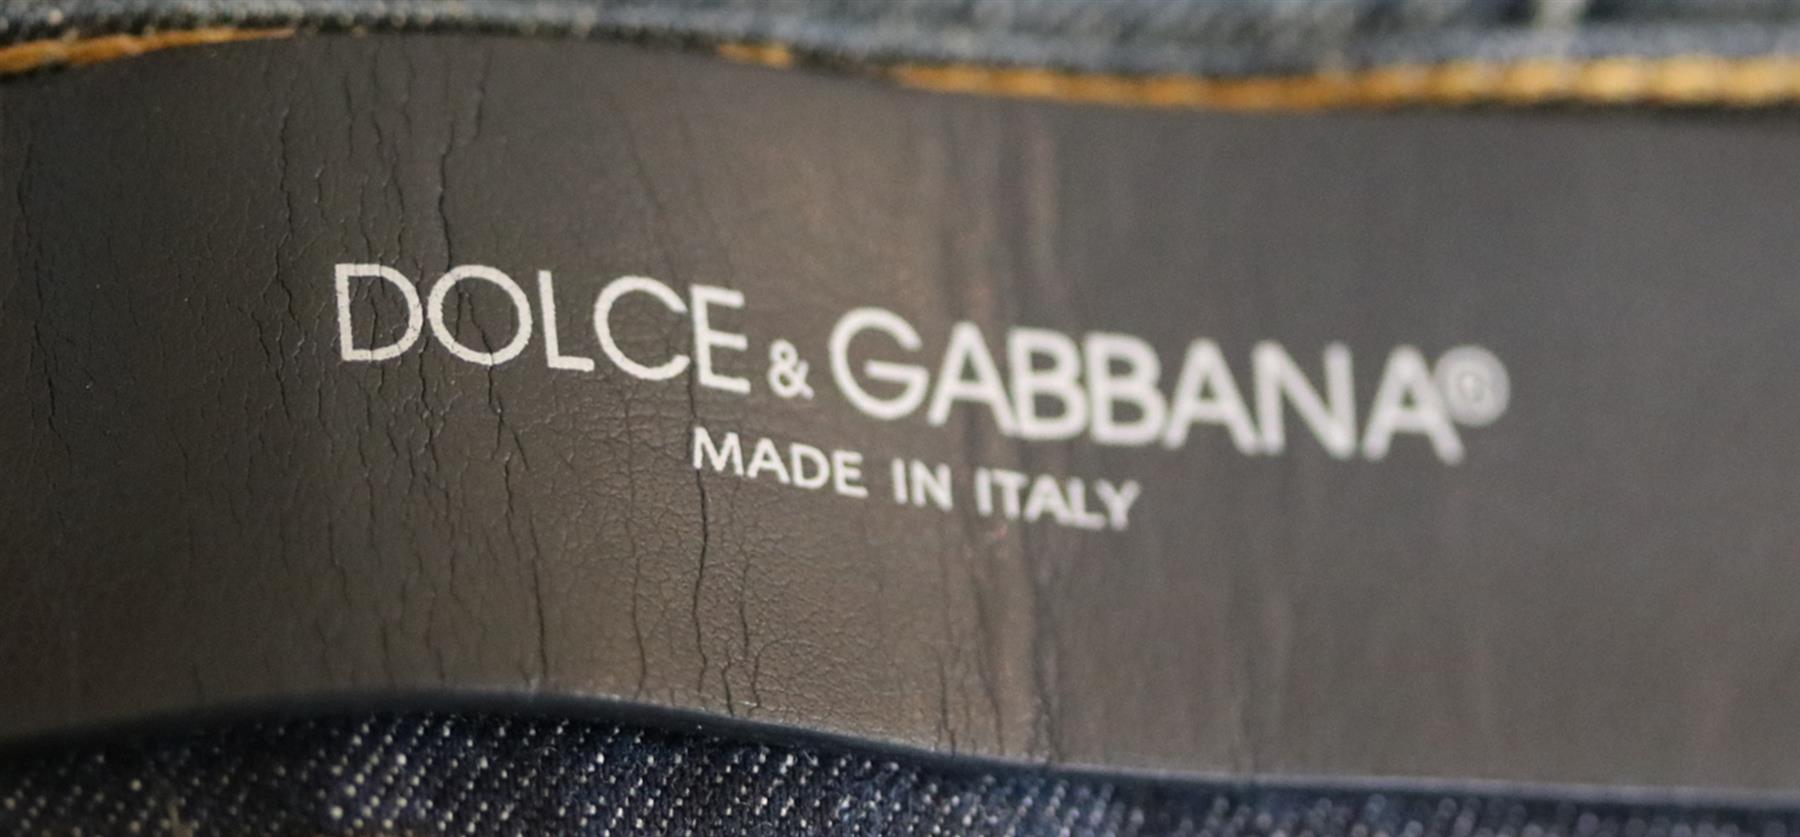 DOLCE AND GABBANA MID RISE STRETCH FIT DENIM JEANS IT 50 UK/US 34